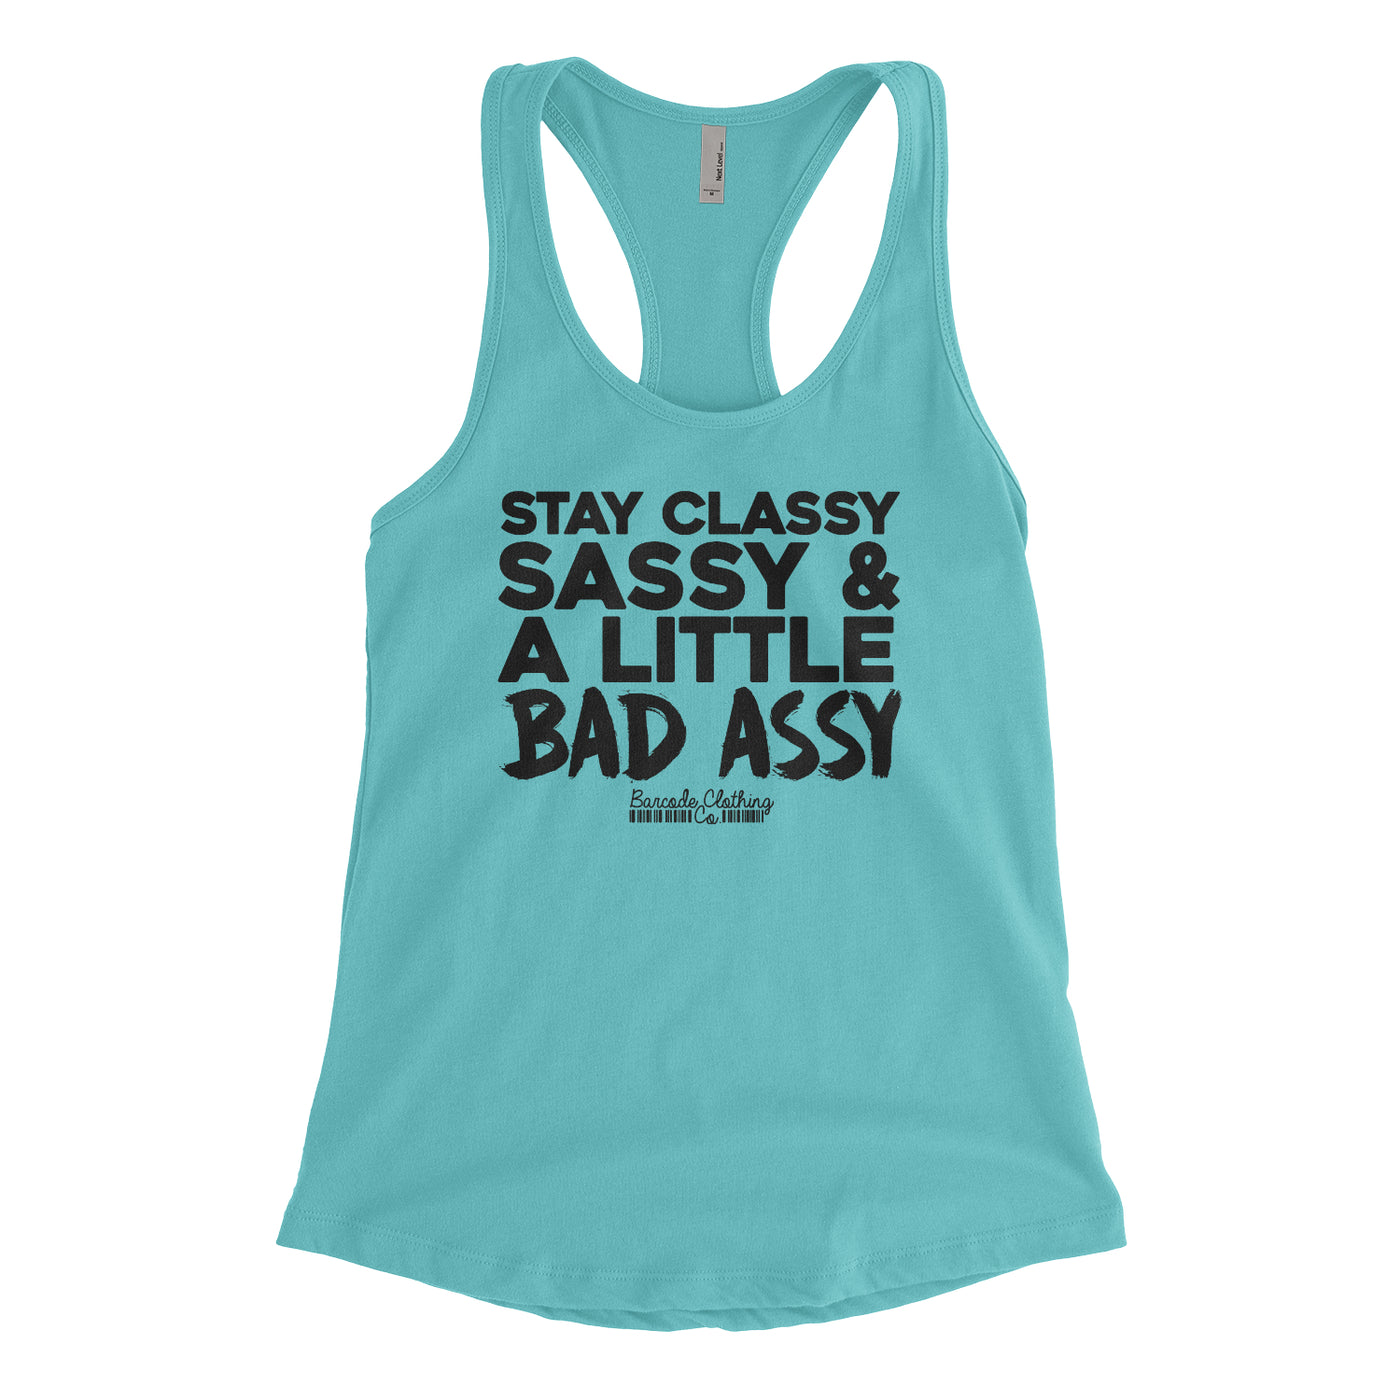 Stay Sassy Classy and A Little Bad Assy Blacked Out